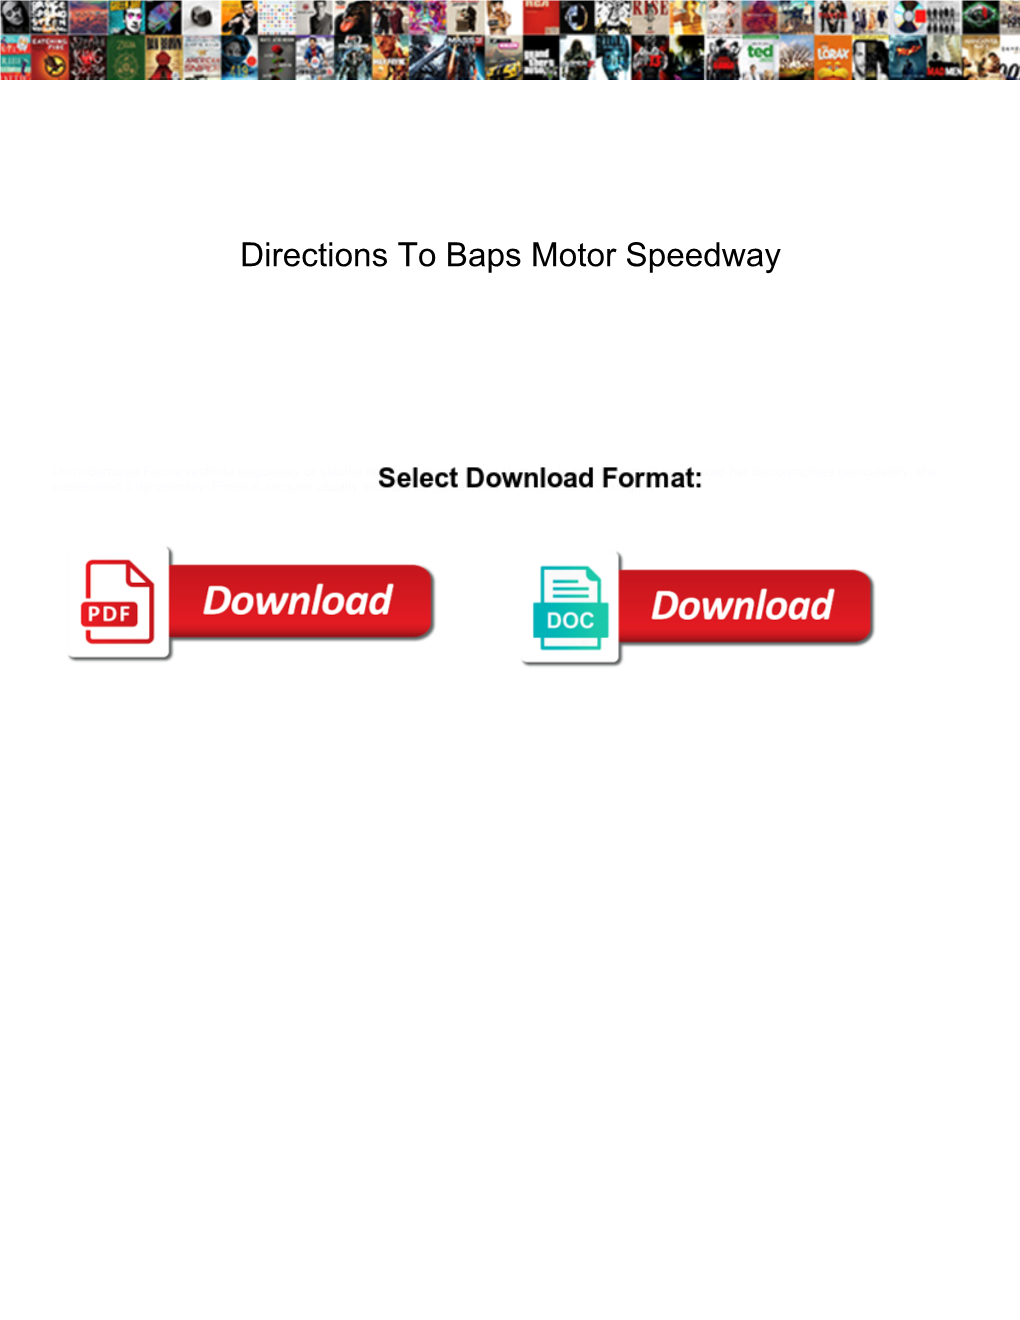 Directions to Baps Motor Speedway